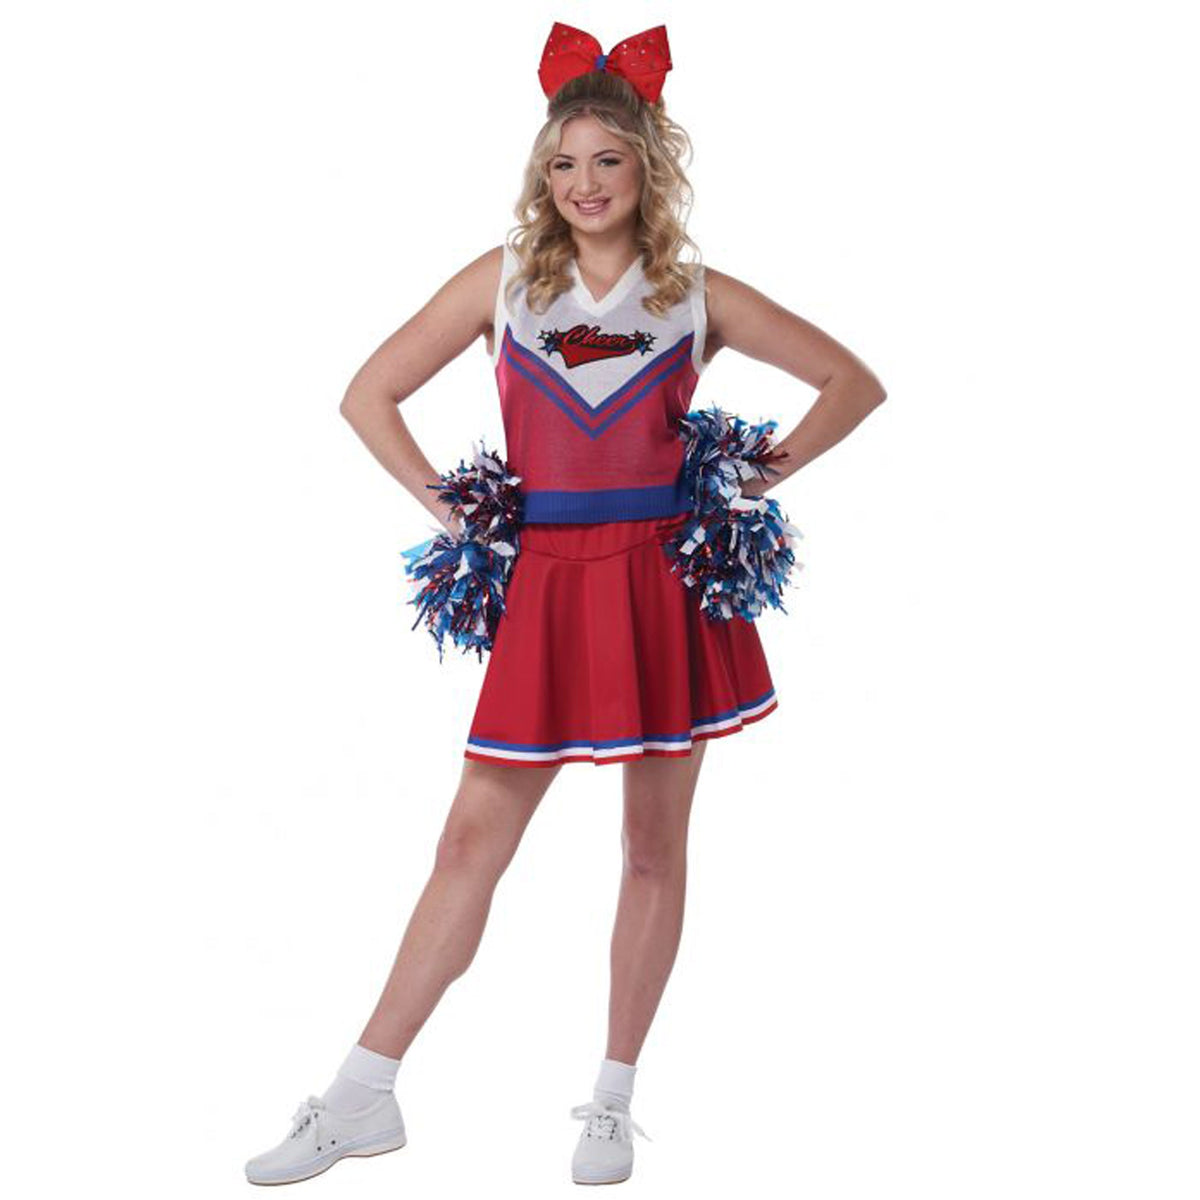 CALIFORNIA COSTUMES Costumes Cheerleader Costume for Adults